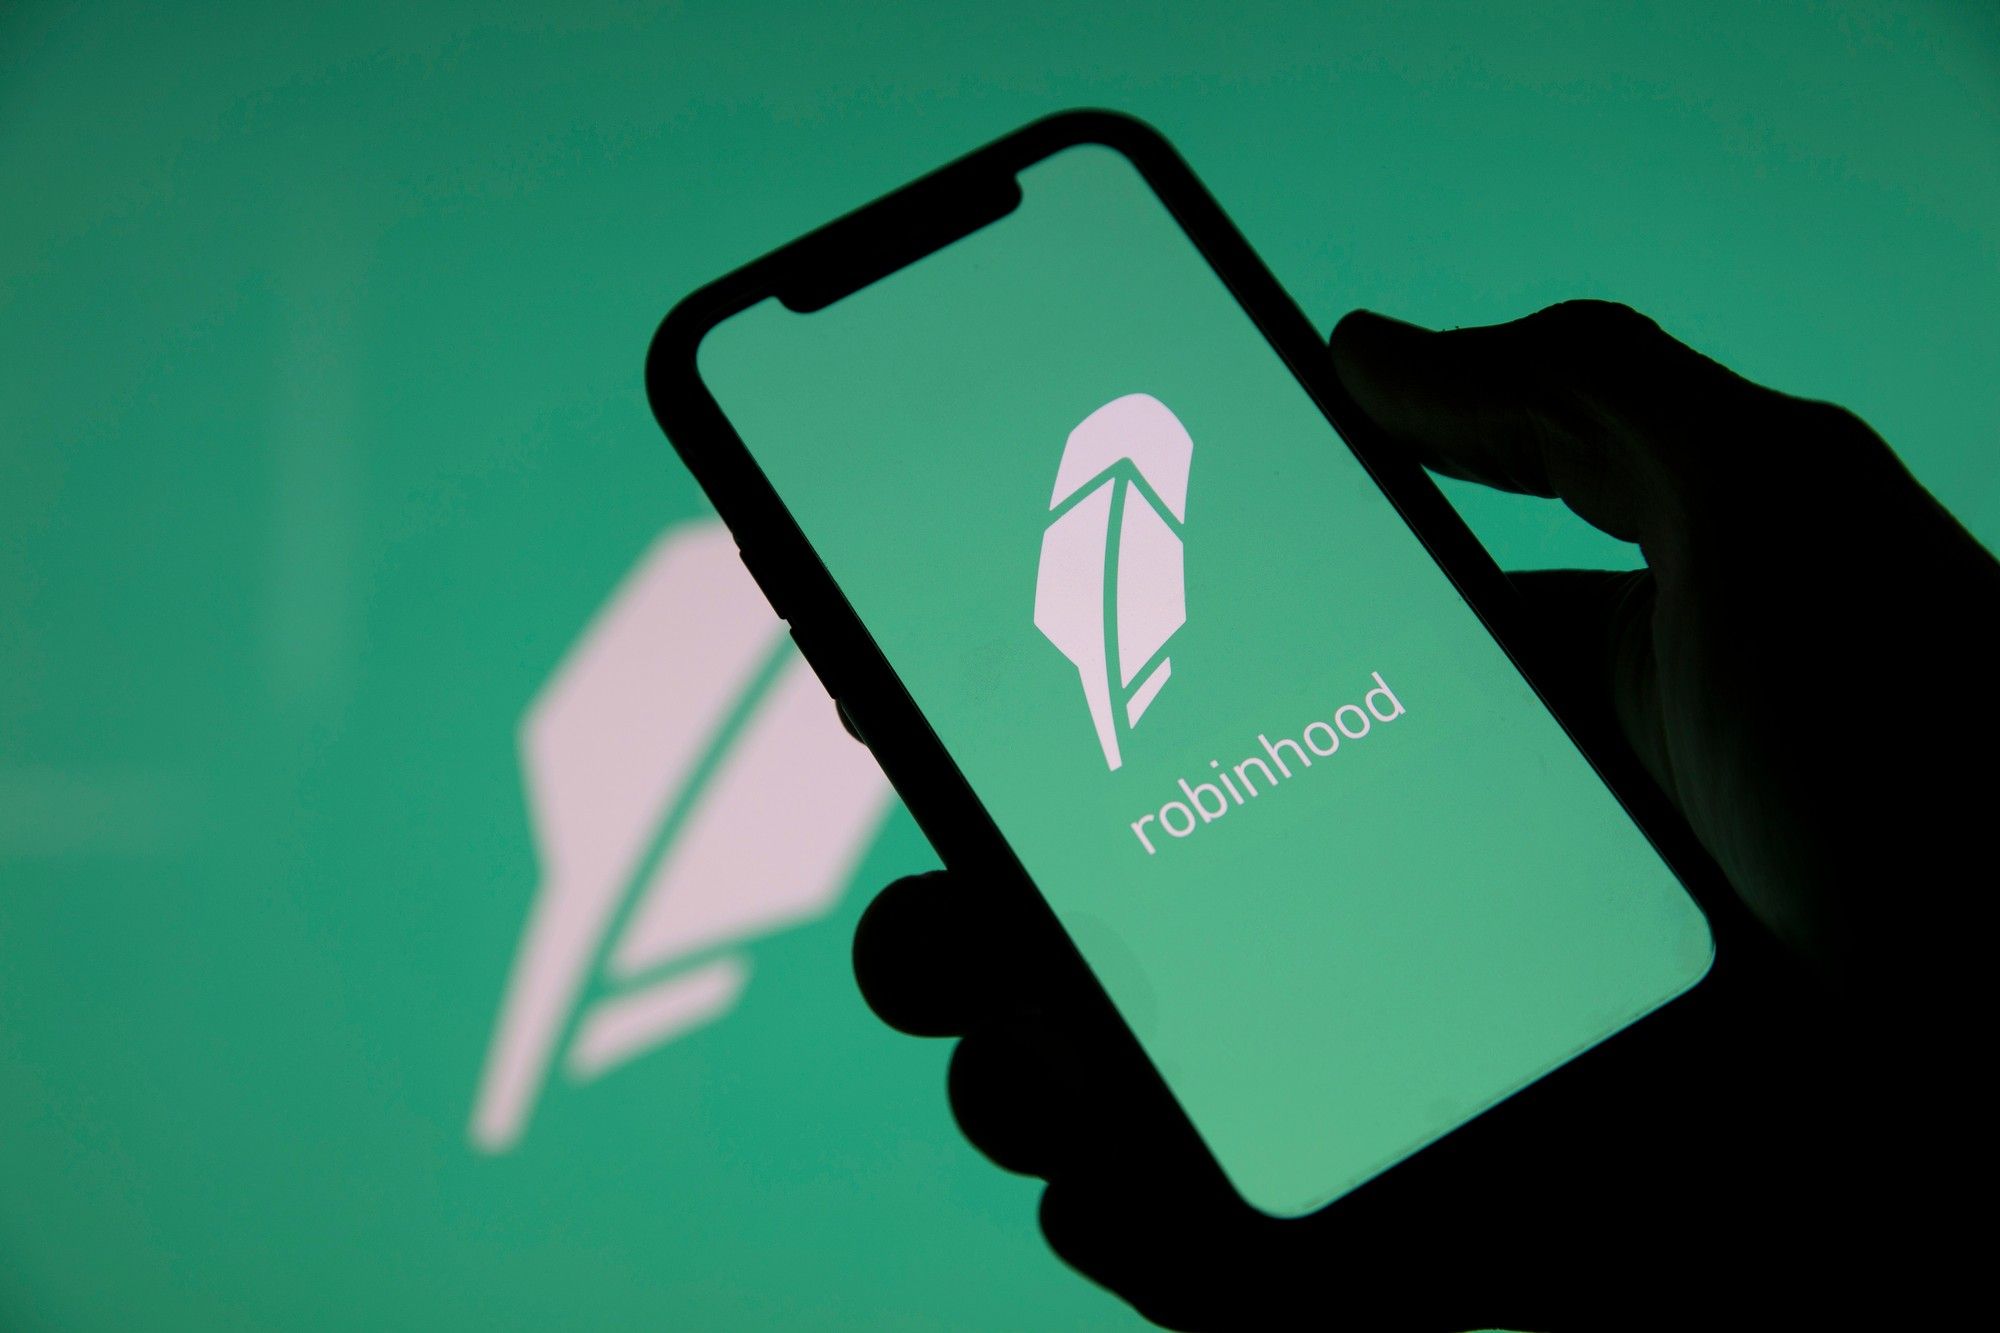 A Florida federal judge wants to recuse himself from a Robinhood class action lawsuit